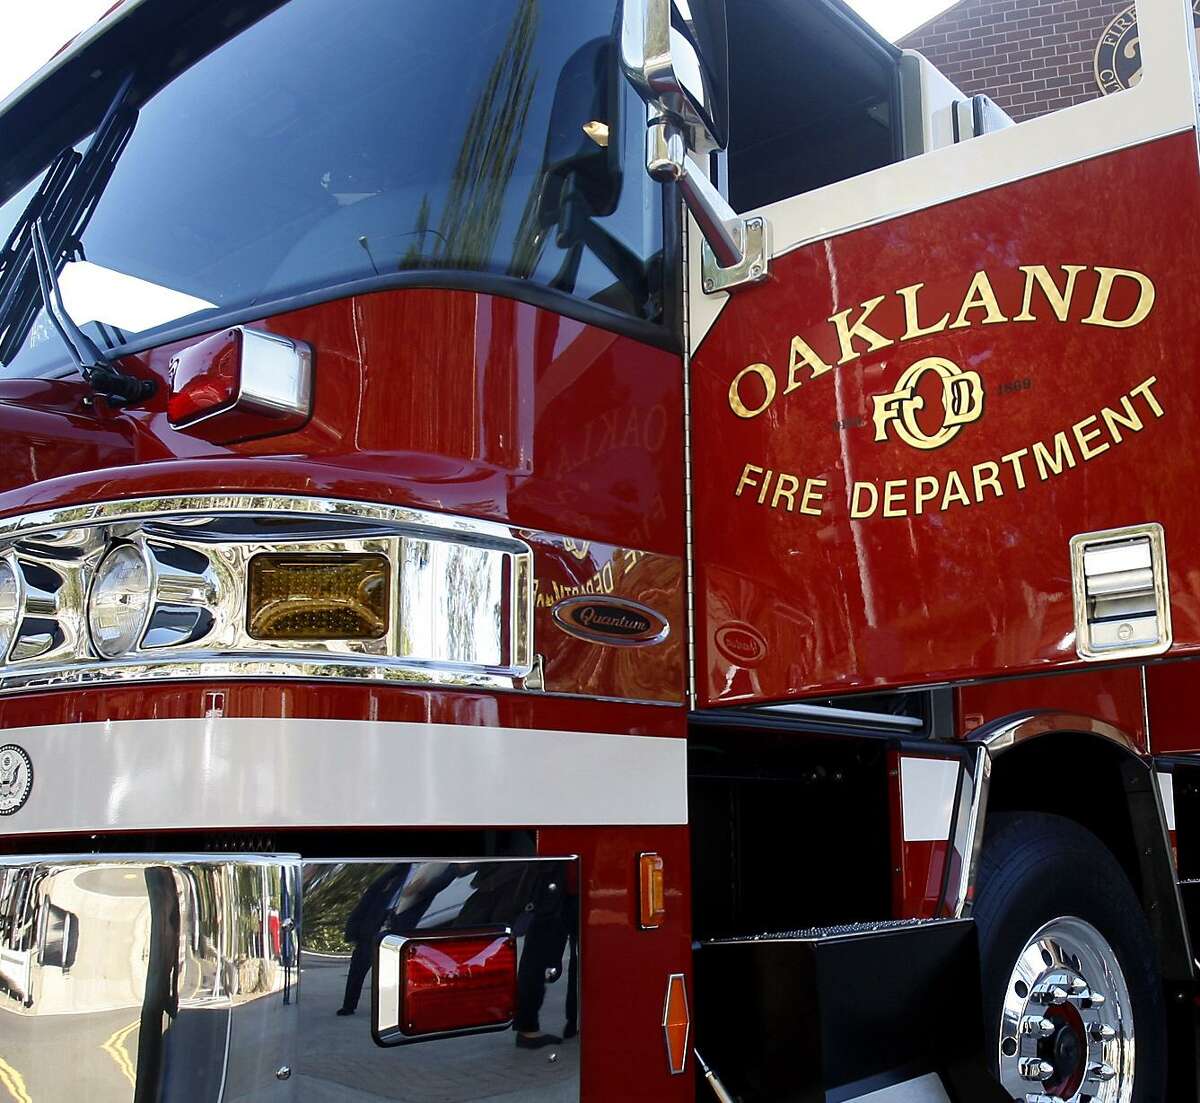 And Oakland Fire Department engine sitting outside a fire station in Oakland, Calif. Oakland firefighters battled a large RV and debris fire that broke out Tuesday near an encampment in West Oakland, according to the Oakland Fire Department.